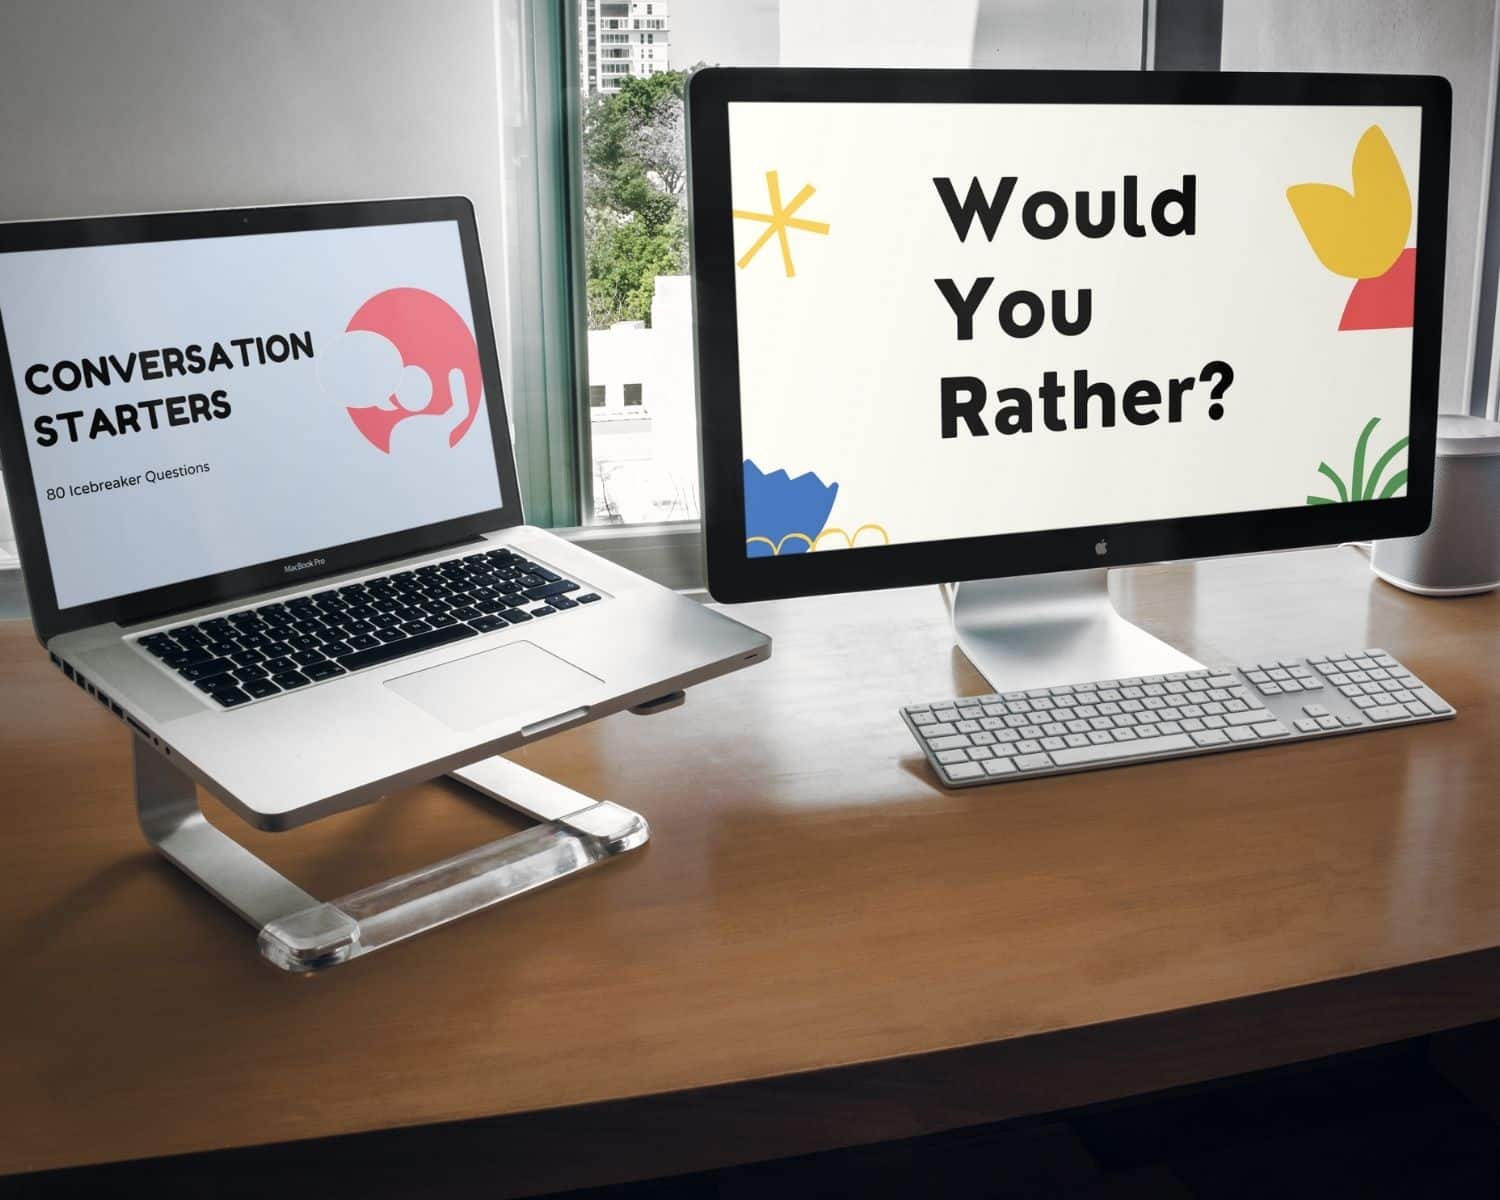 Would You Rather and Conversation Starters Virtual Games are shown on two computers next to ach other